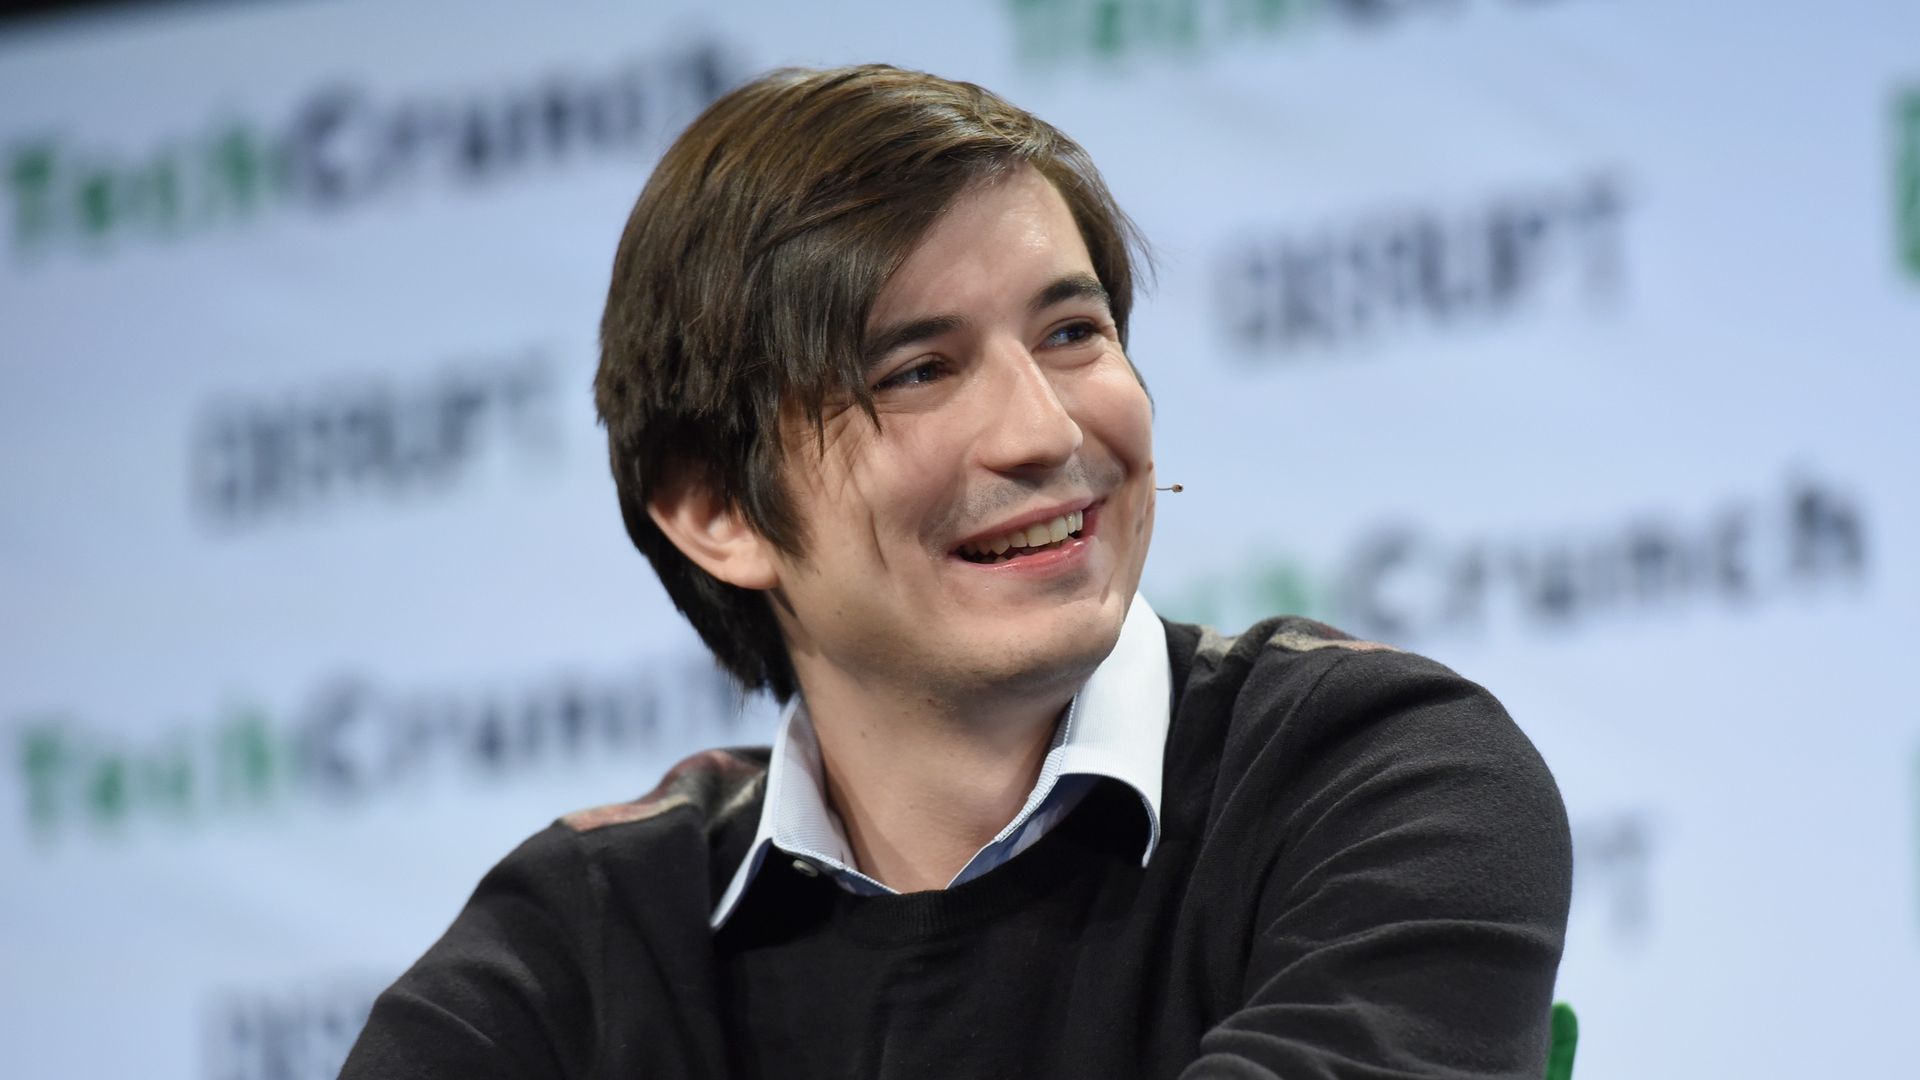 Co-founder and co-CEO of Robinhood Vladimir Tenev